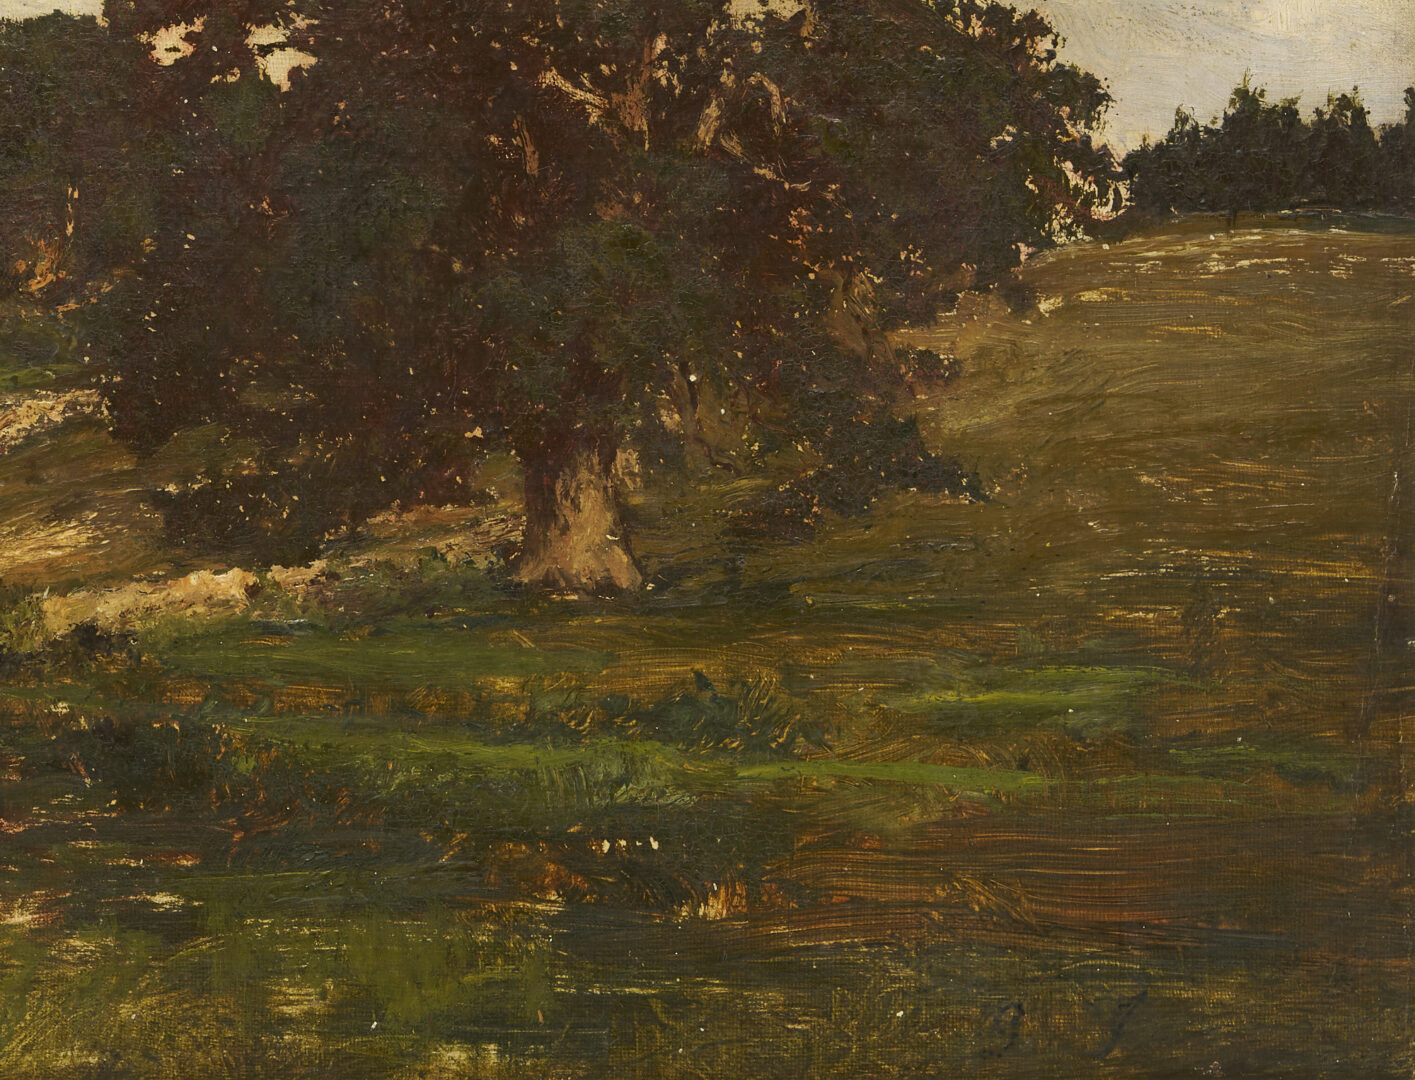 Lot 108: George Inness O/C Landscape with a Large Tree, c. 1856